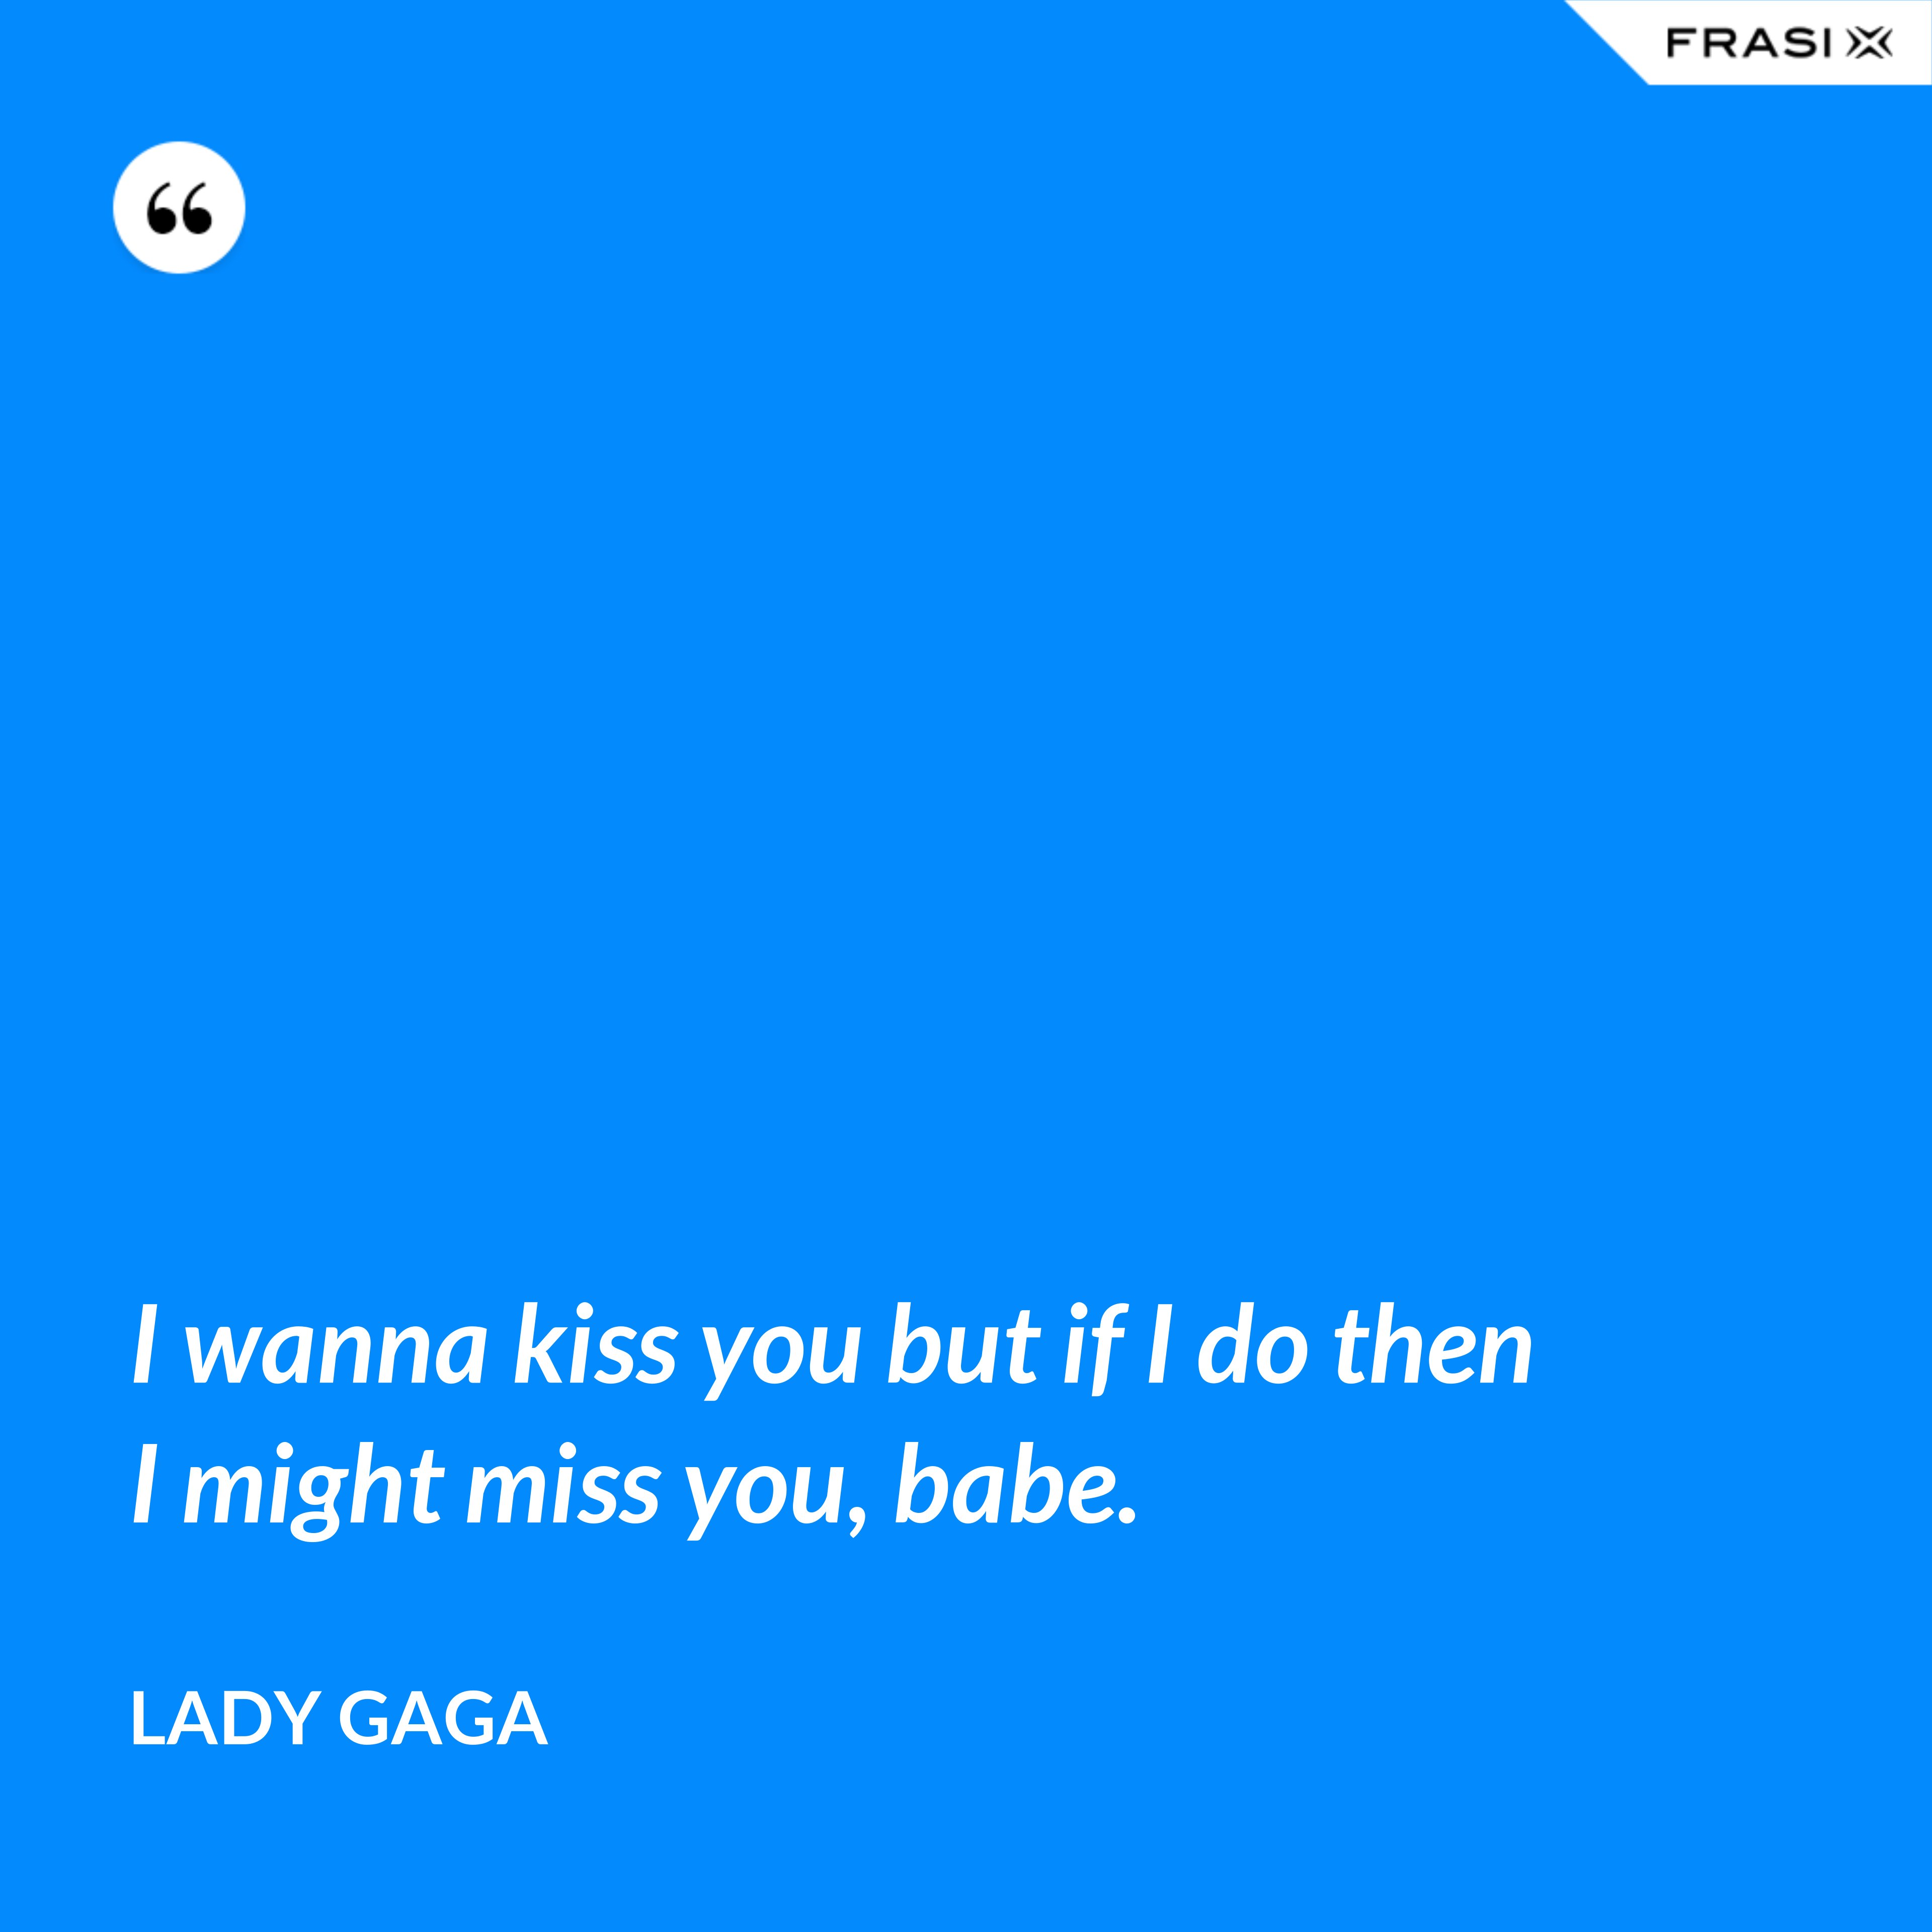 I wanna kiss you but if I do then I might miss you, babe. - Lady Gaga